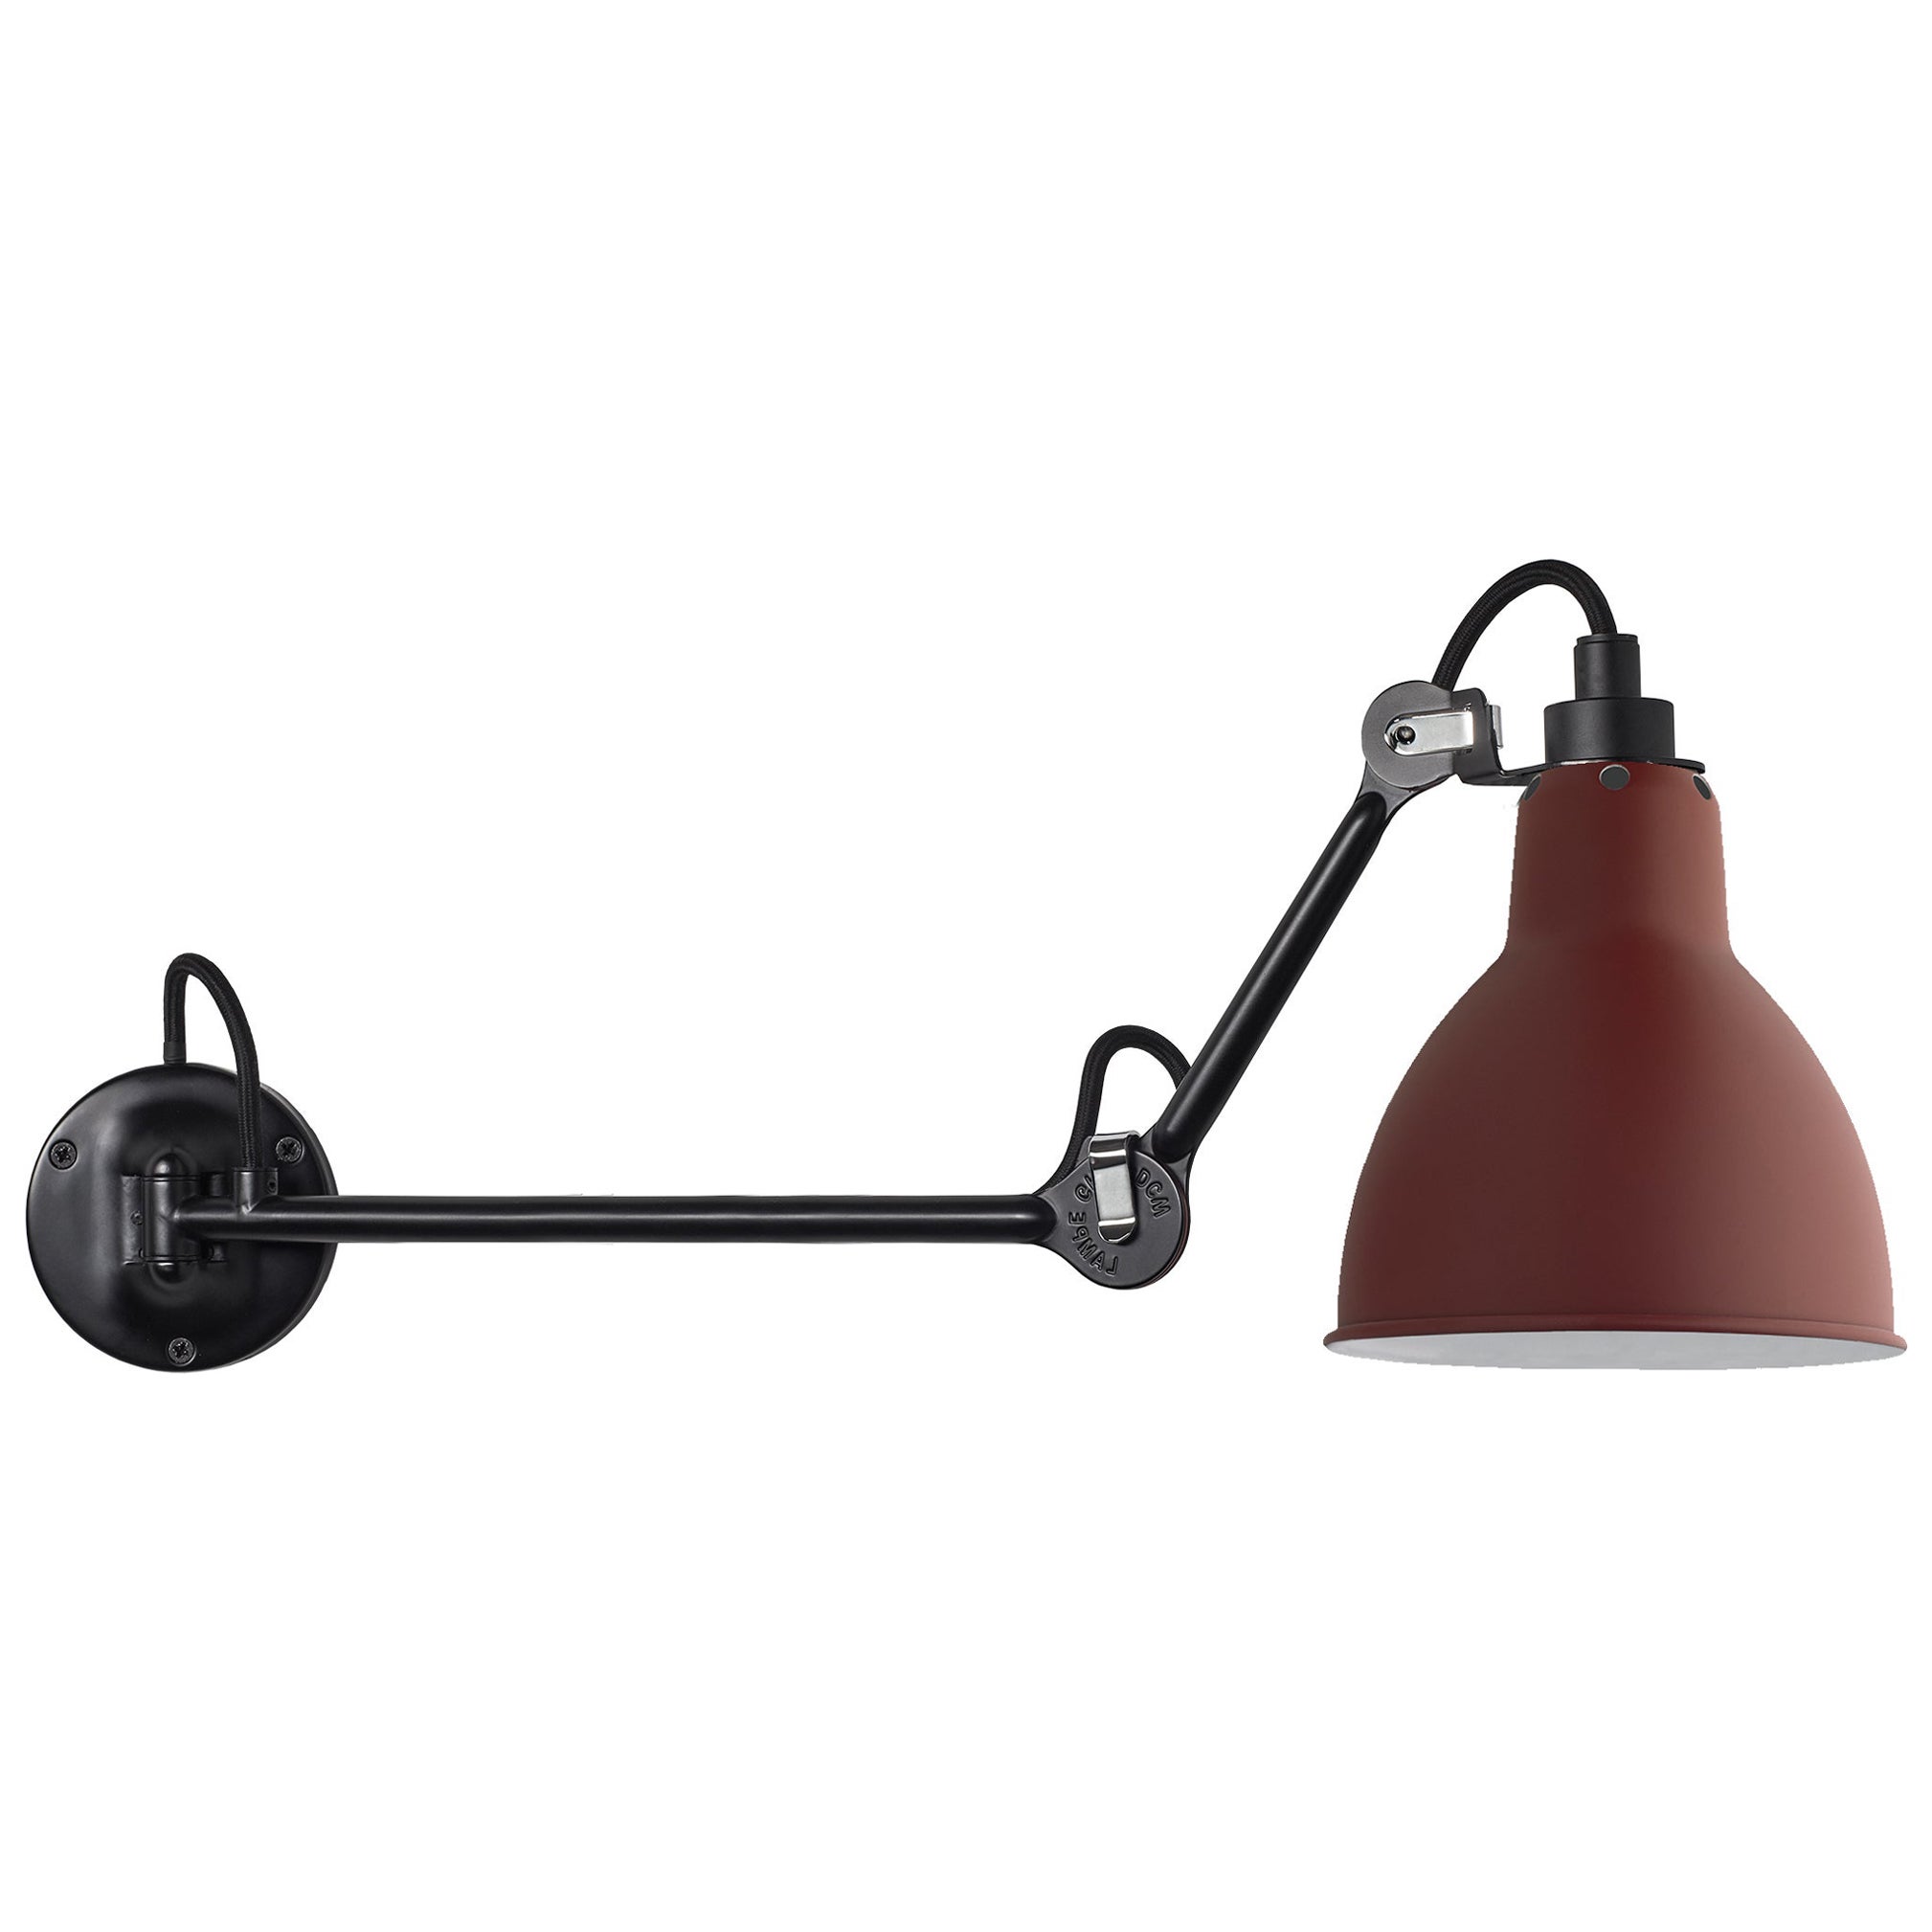 DCW Editions La Lampe Gras N°204 L40 Wall Lamp in Black Steel Arm and Red Shade For Sale